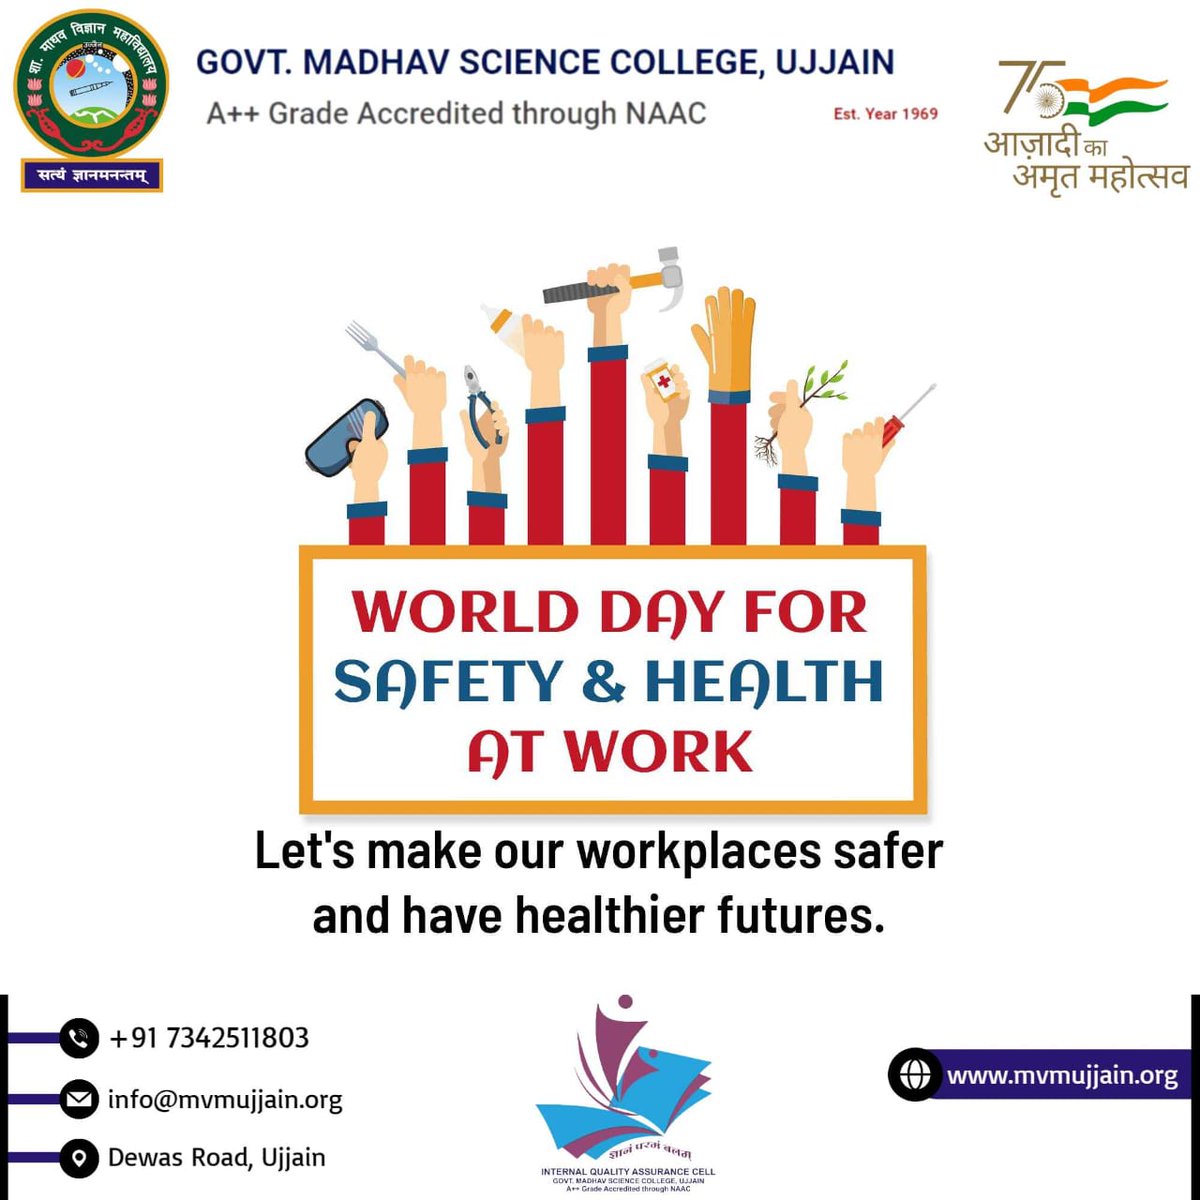 Greetings from Govt Science College, Ujjain
                    #SafeAndHealthyWorkingEnvironment #ReduceRisks #HealthyBusiness #OccupationalSafety #WorkplaceInjuryPrevention #OccupationalHealth #HealthAtWork #PreventInjuries #SafeWorkers